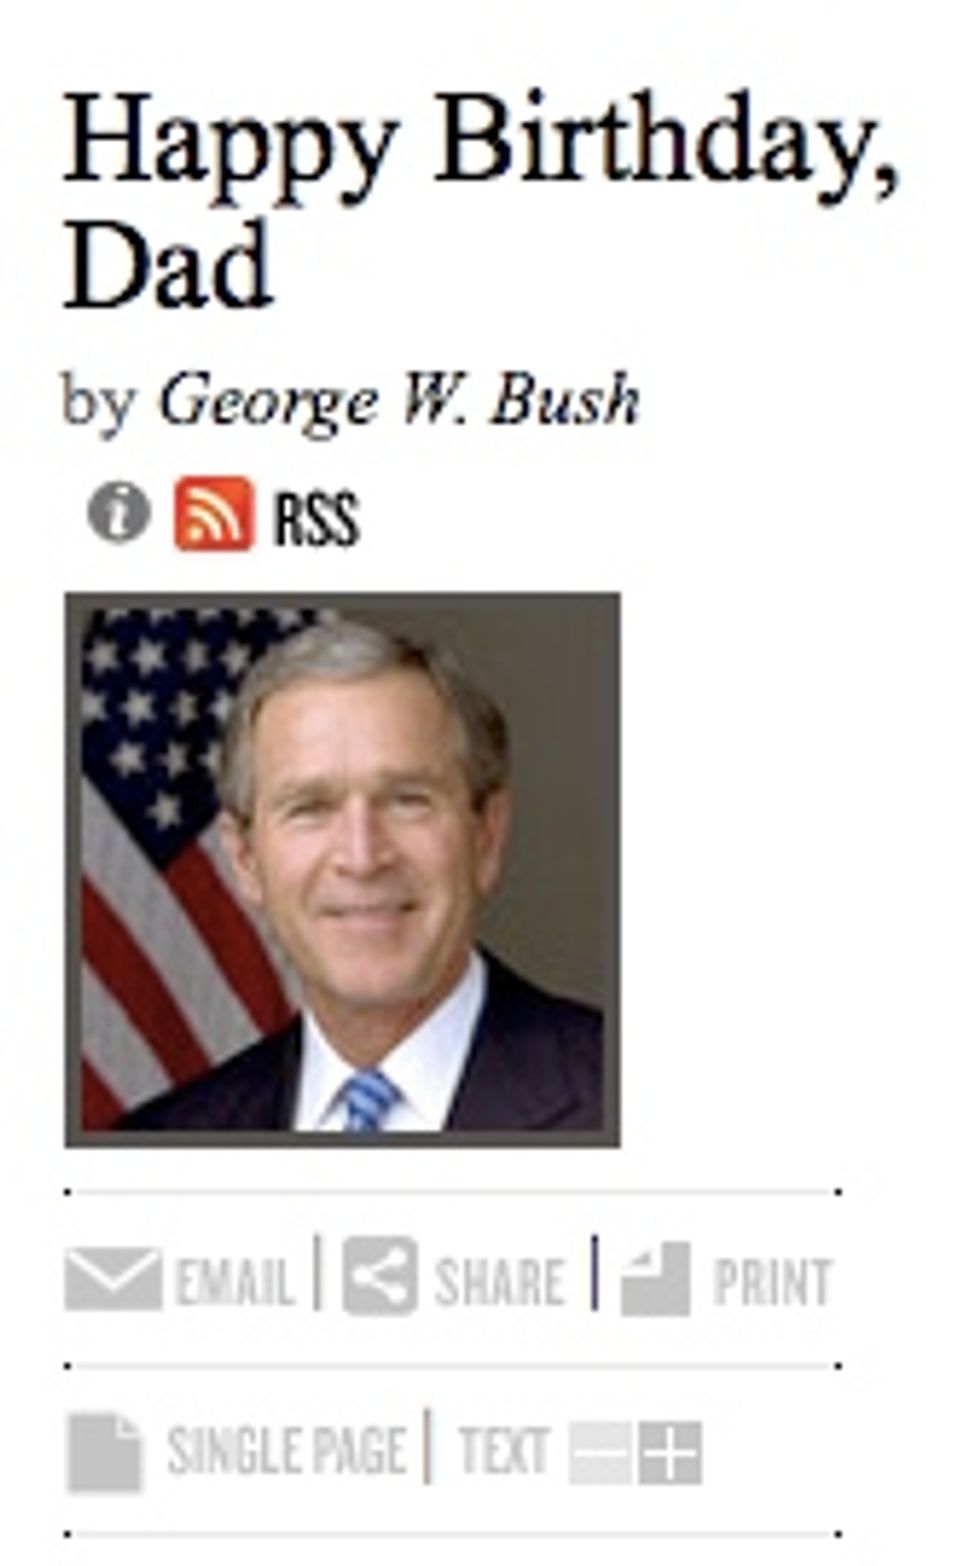 George W. Bush Also Writes For The Daily Beast